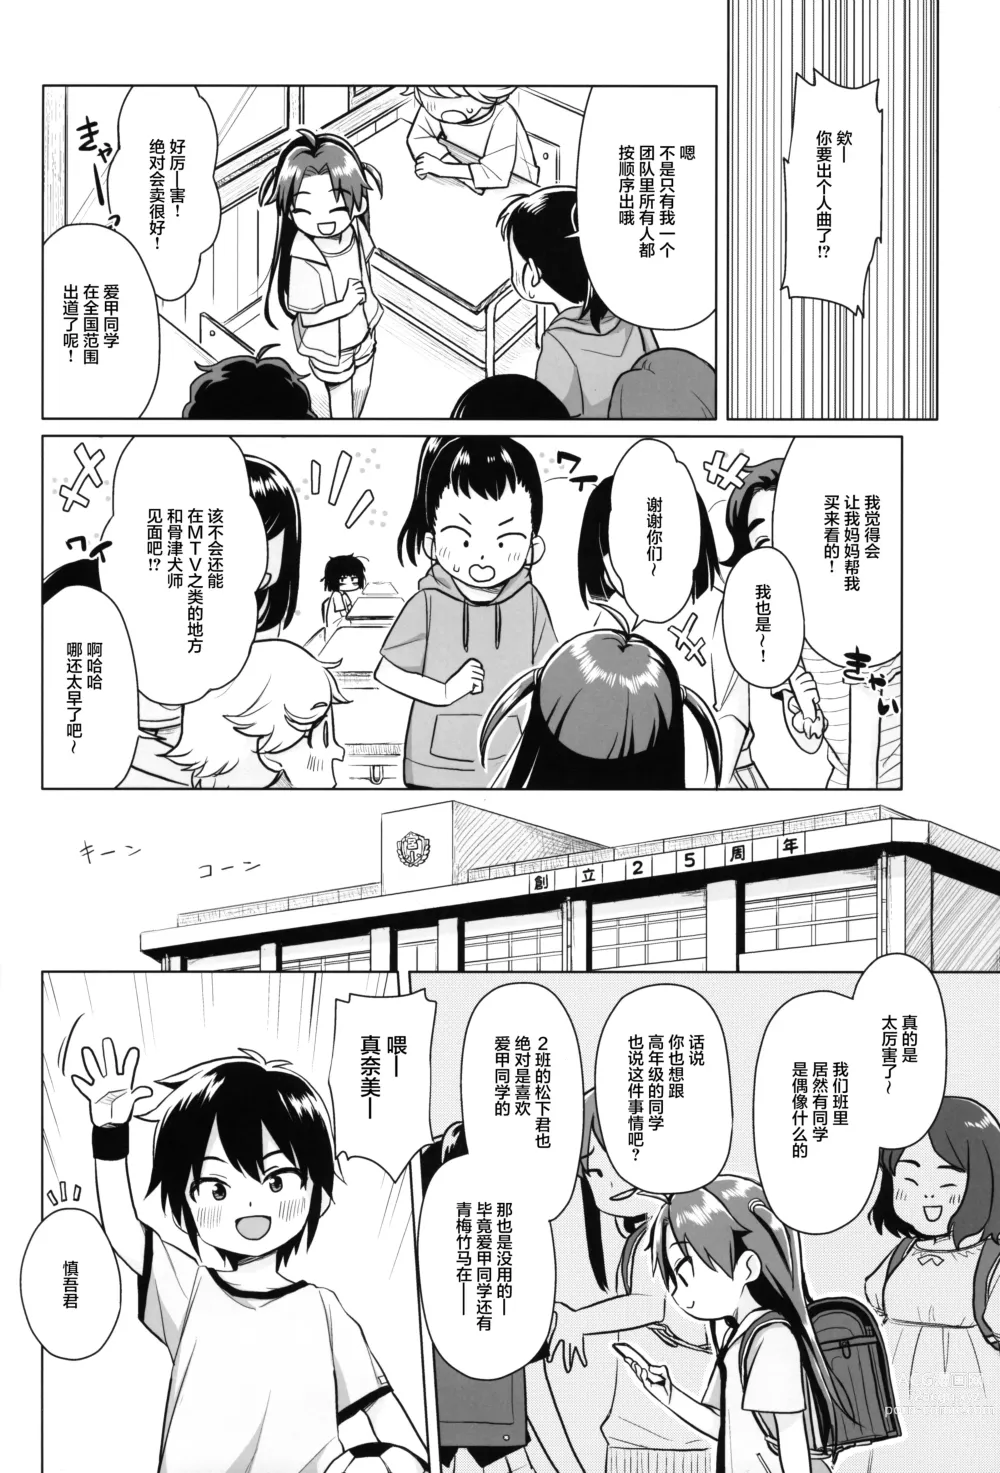 Page 7 of doujinshi 无法如愿的初恋